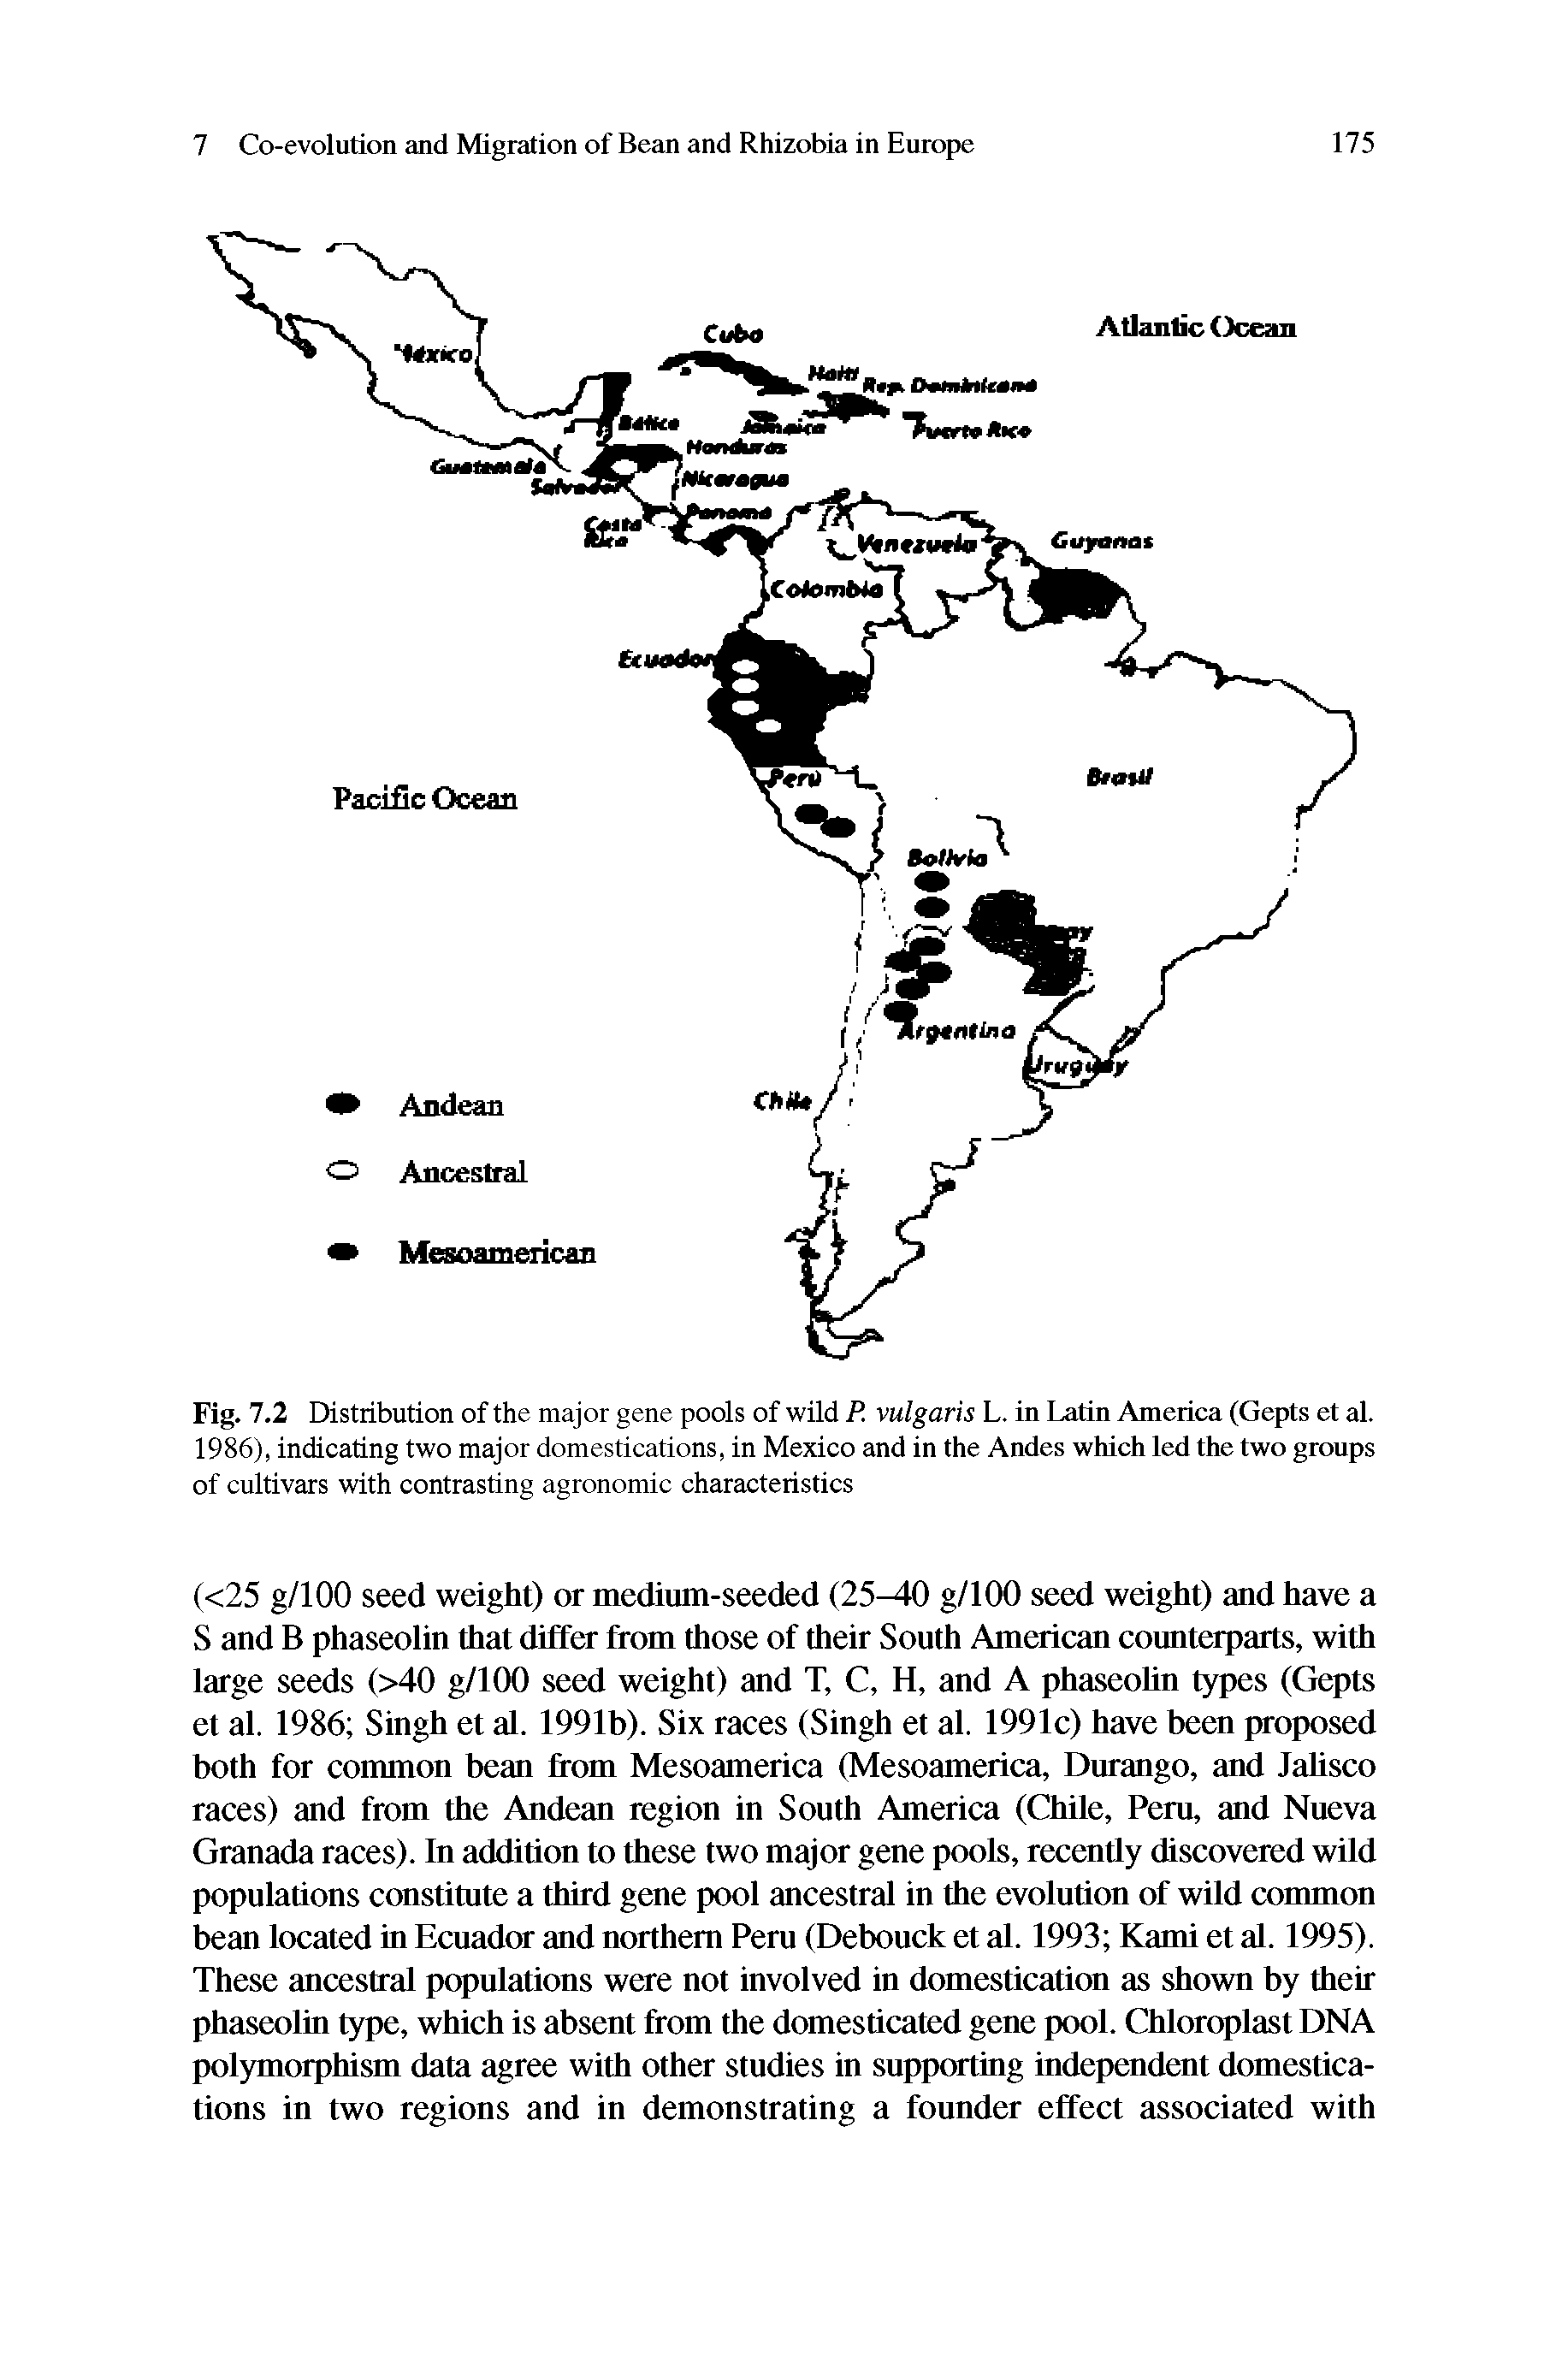 Fig. 7.2 Distribution of the major gene pools of wild P. vulgaris L. in Latin America (Gepts et al. 1986), indicating two major domestications, in Mexico and in the Andes which led the two groups of cultivars with contrasting agronomic characteristics...